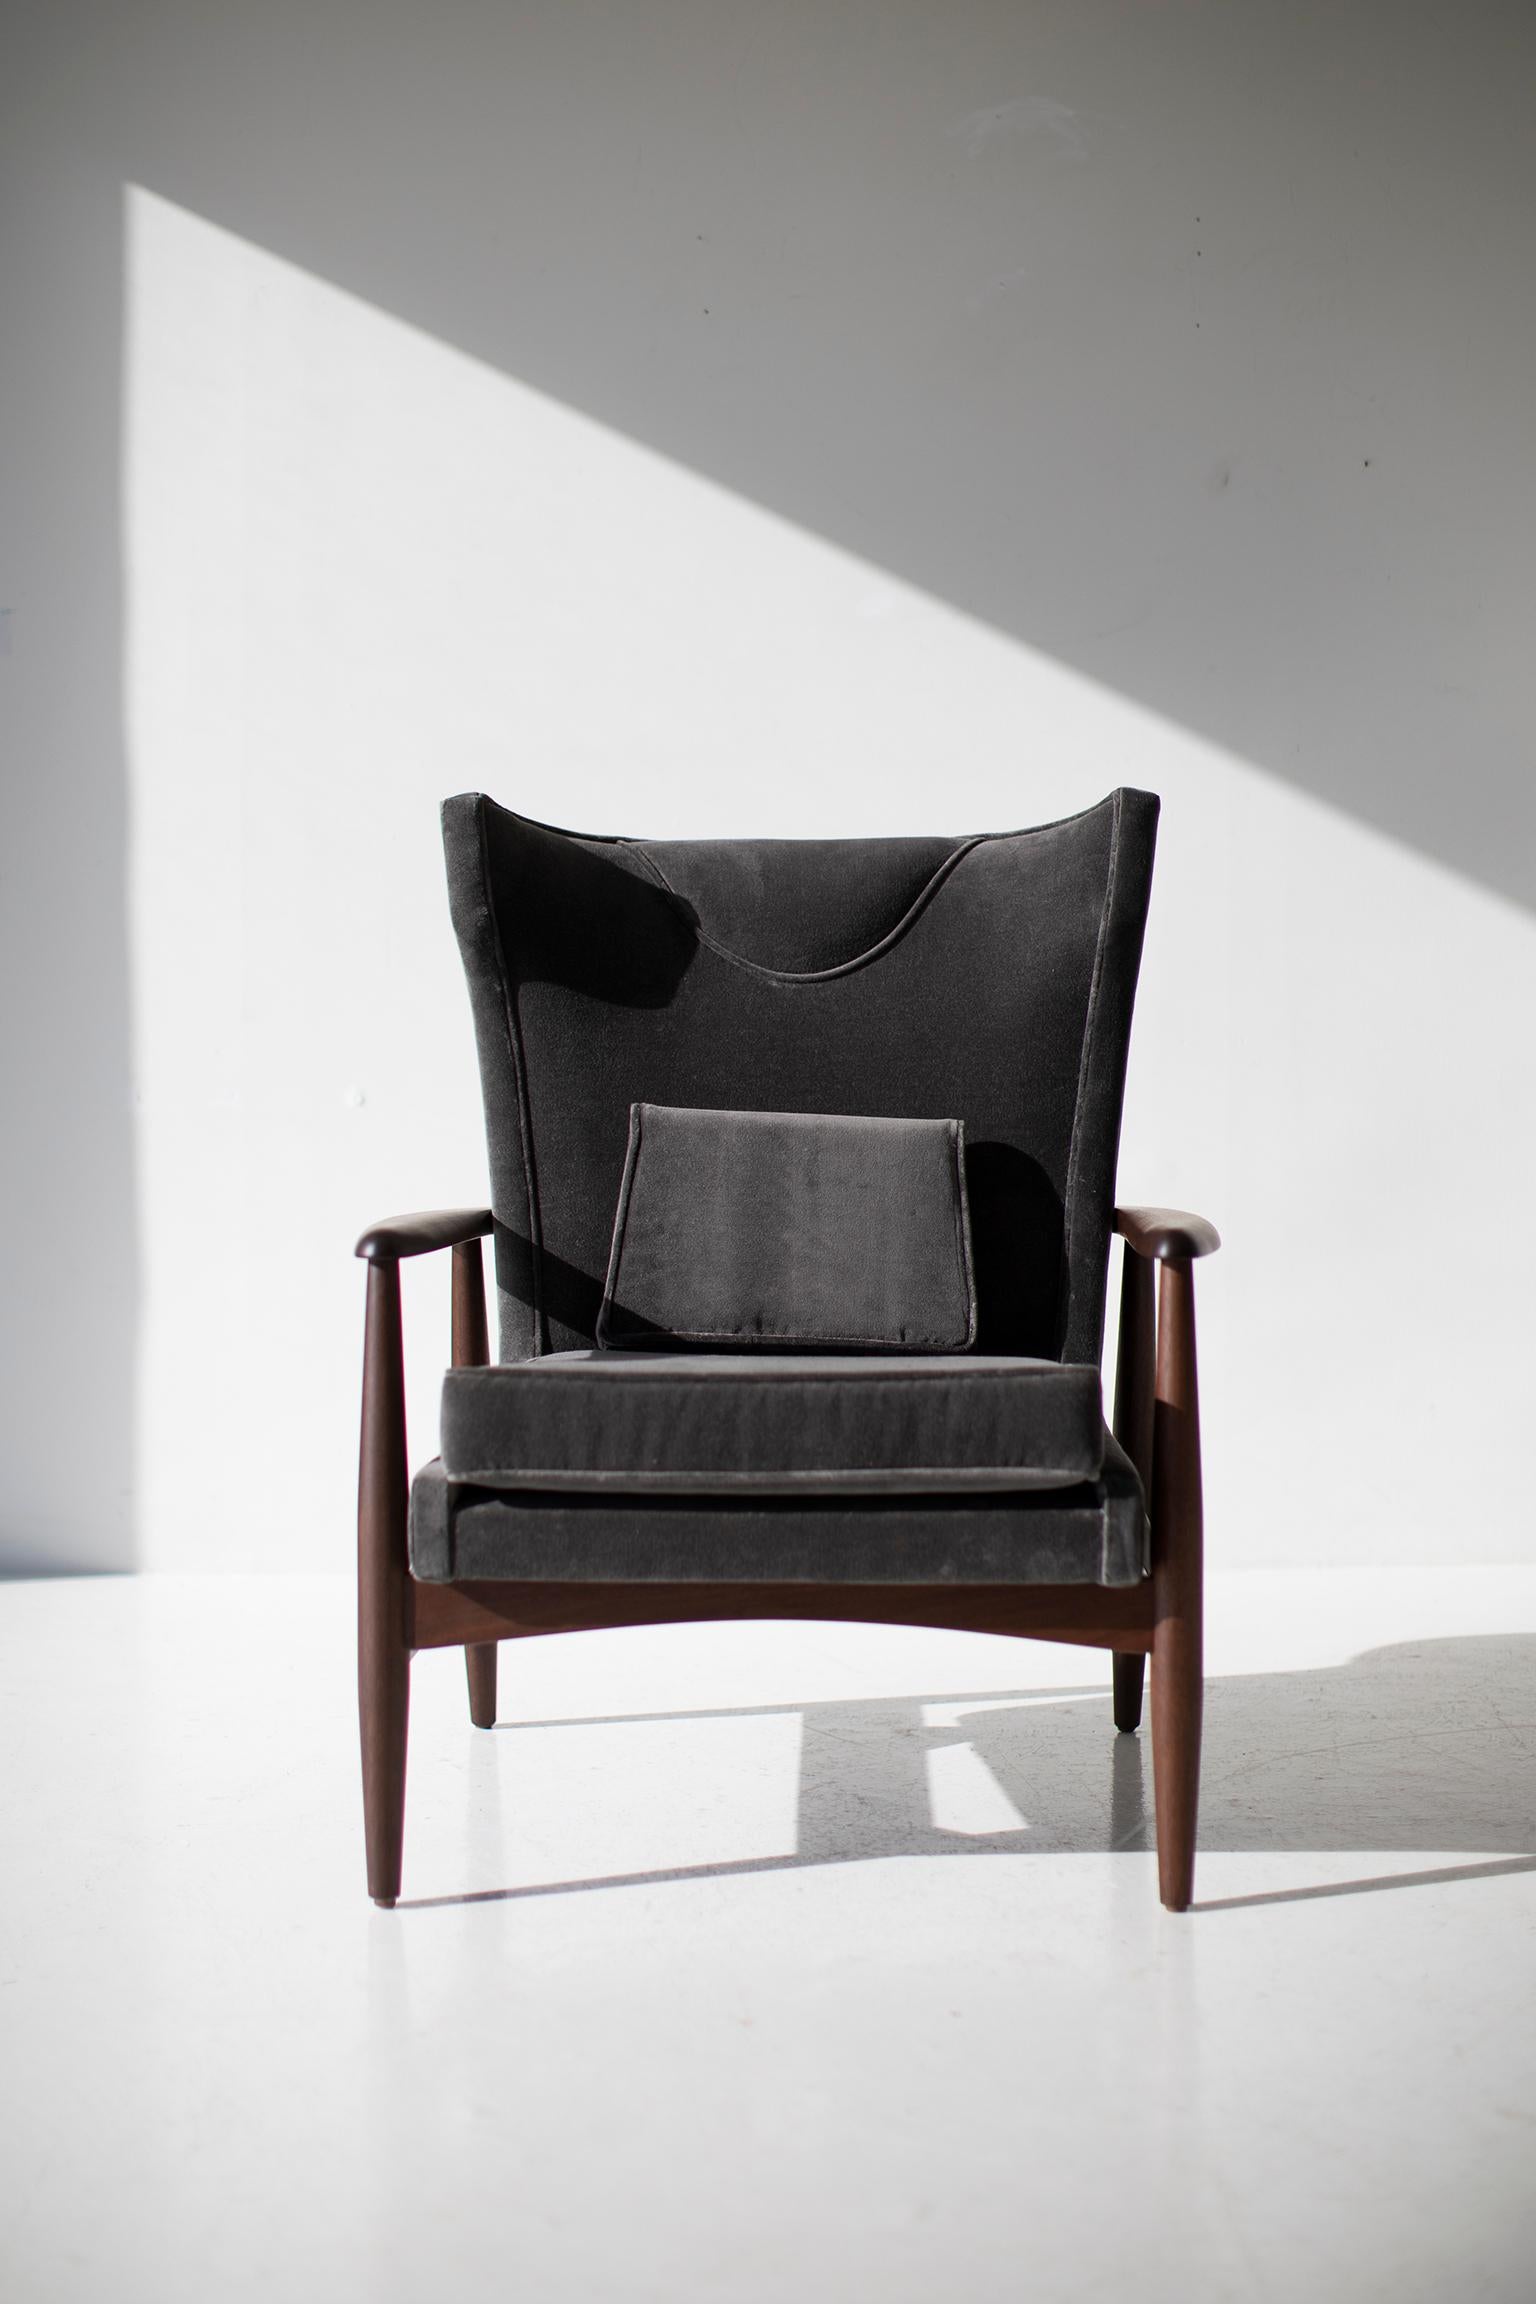 Designer: Lawrence Peabody

Manufacturer: Craft Associates Furniture
Period/Model: Mid-Century Modern
Specs: Walnut, velvet
Yardage: 6 yards

This Lawrence Peabody wing chair for Craft Associates Furniture is expertly handcrafted and upholstered.